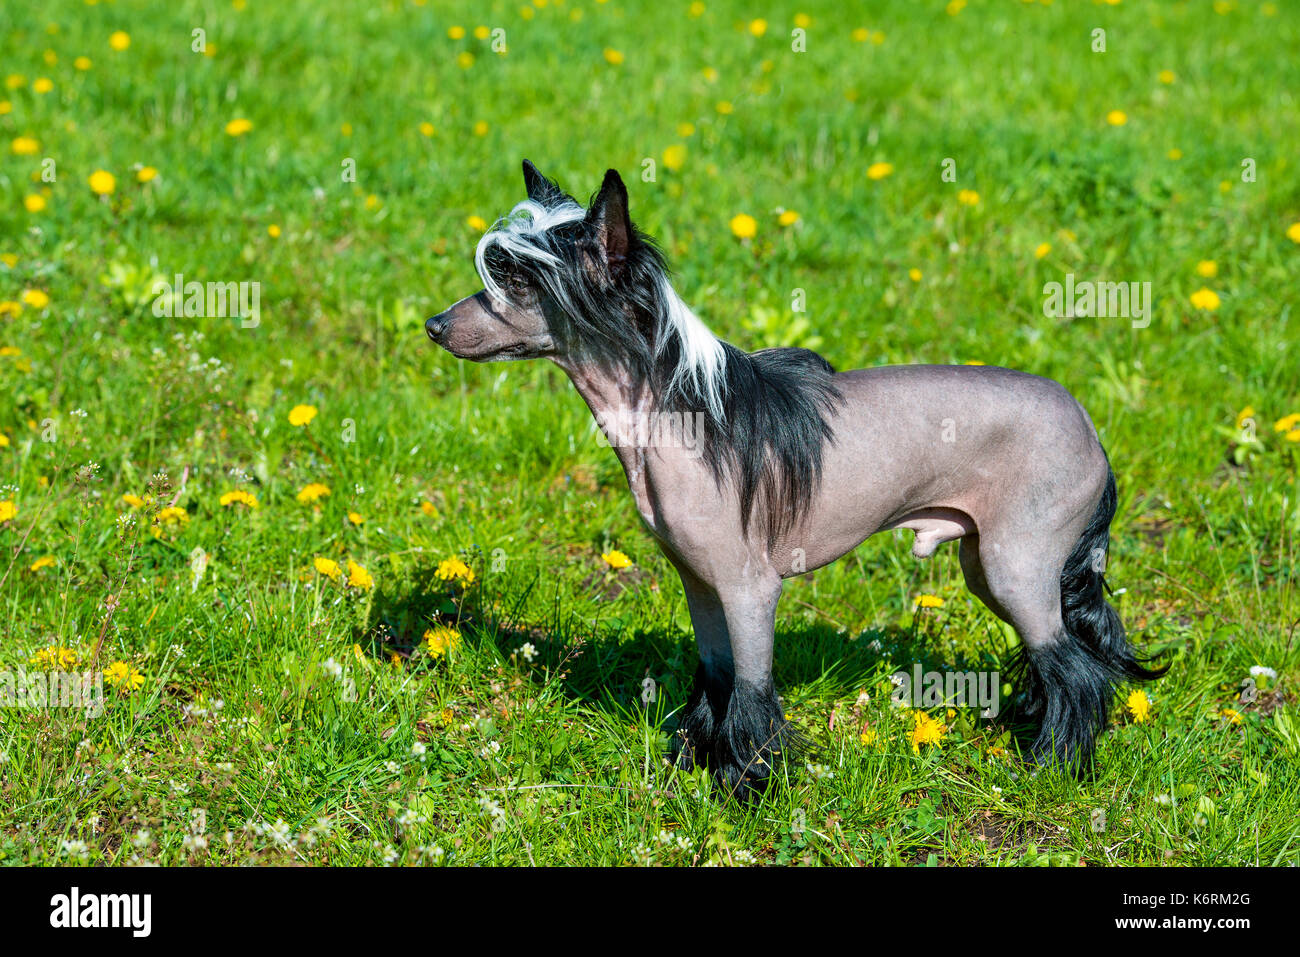 Chinese crested dog black. The Chinese crested dog walks on the grass of the park. Stock Photo